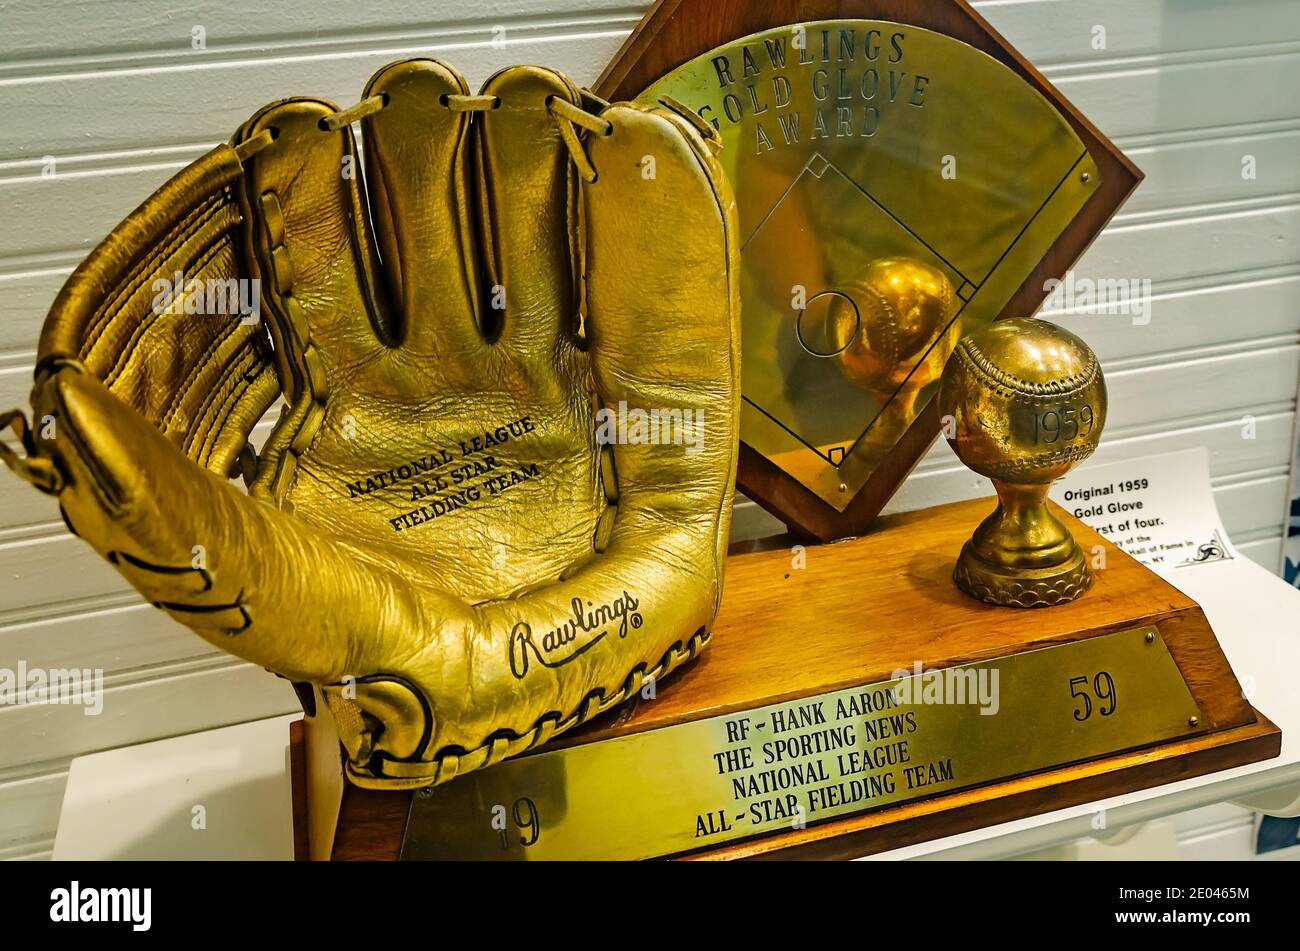 Hank Aaron’s Rawlings Gold Glove Award from 1959 is displayed at the Hank Aaron Childhood Home and Museum, Aug. 23, 2017, in Mobile, Alabama. Stock Photo